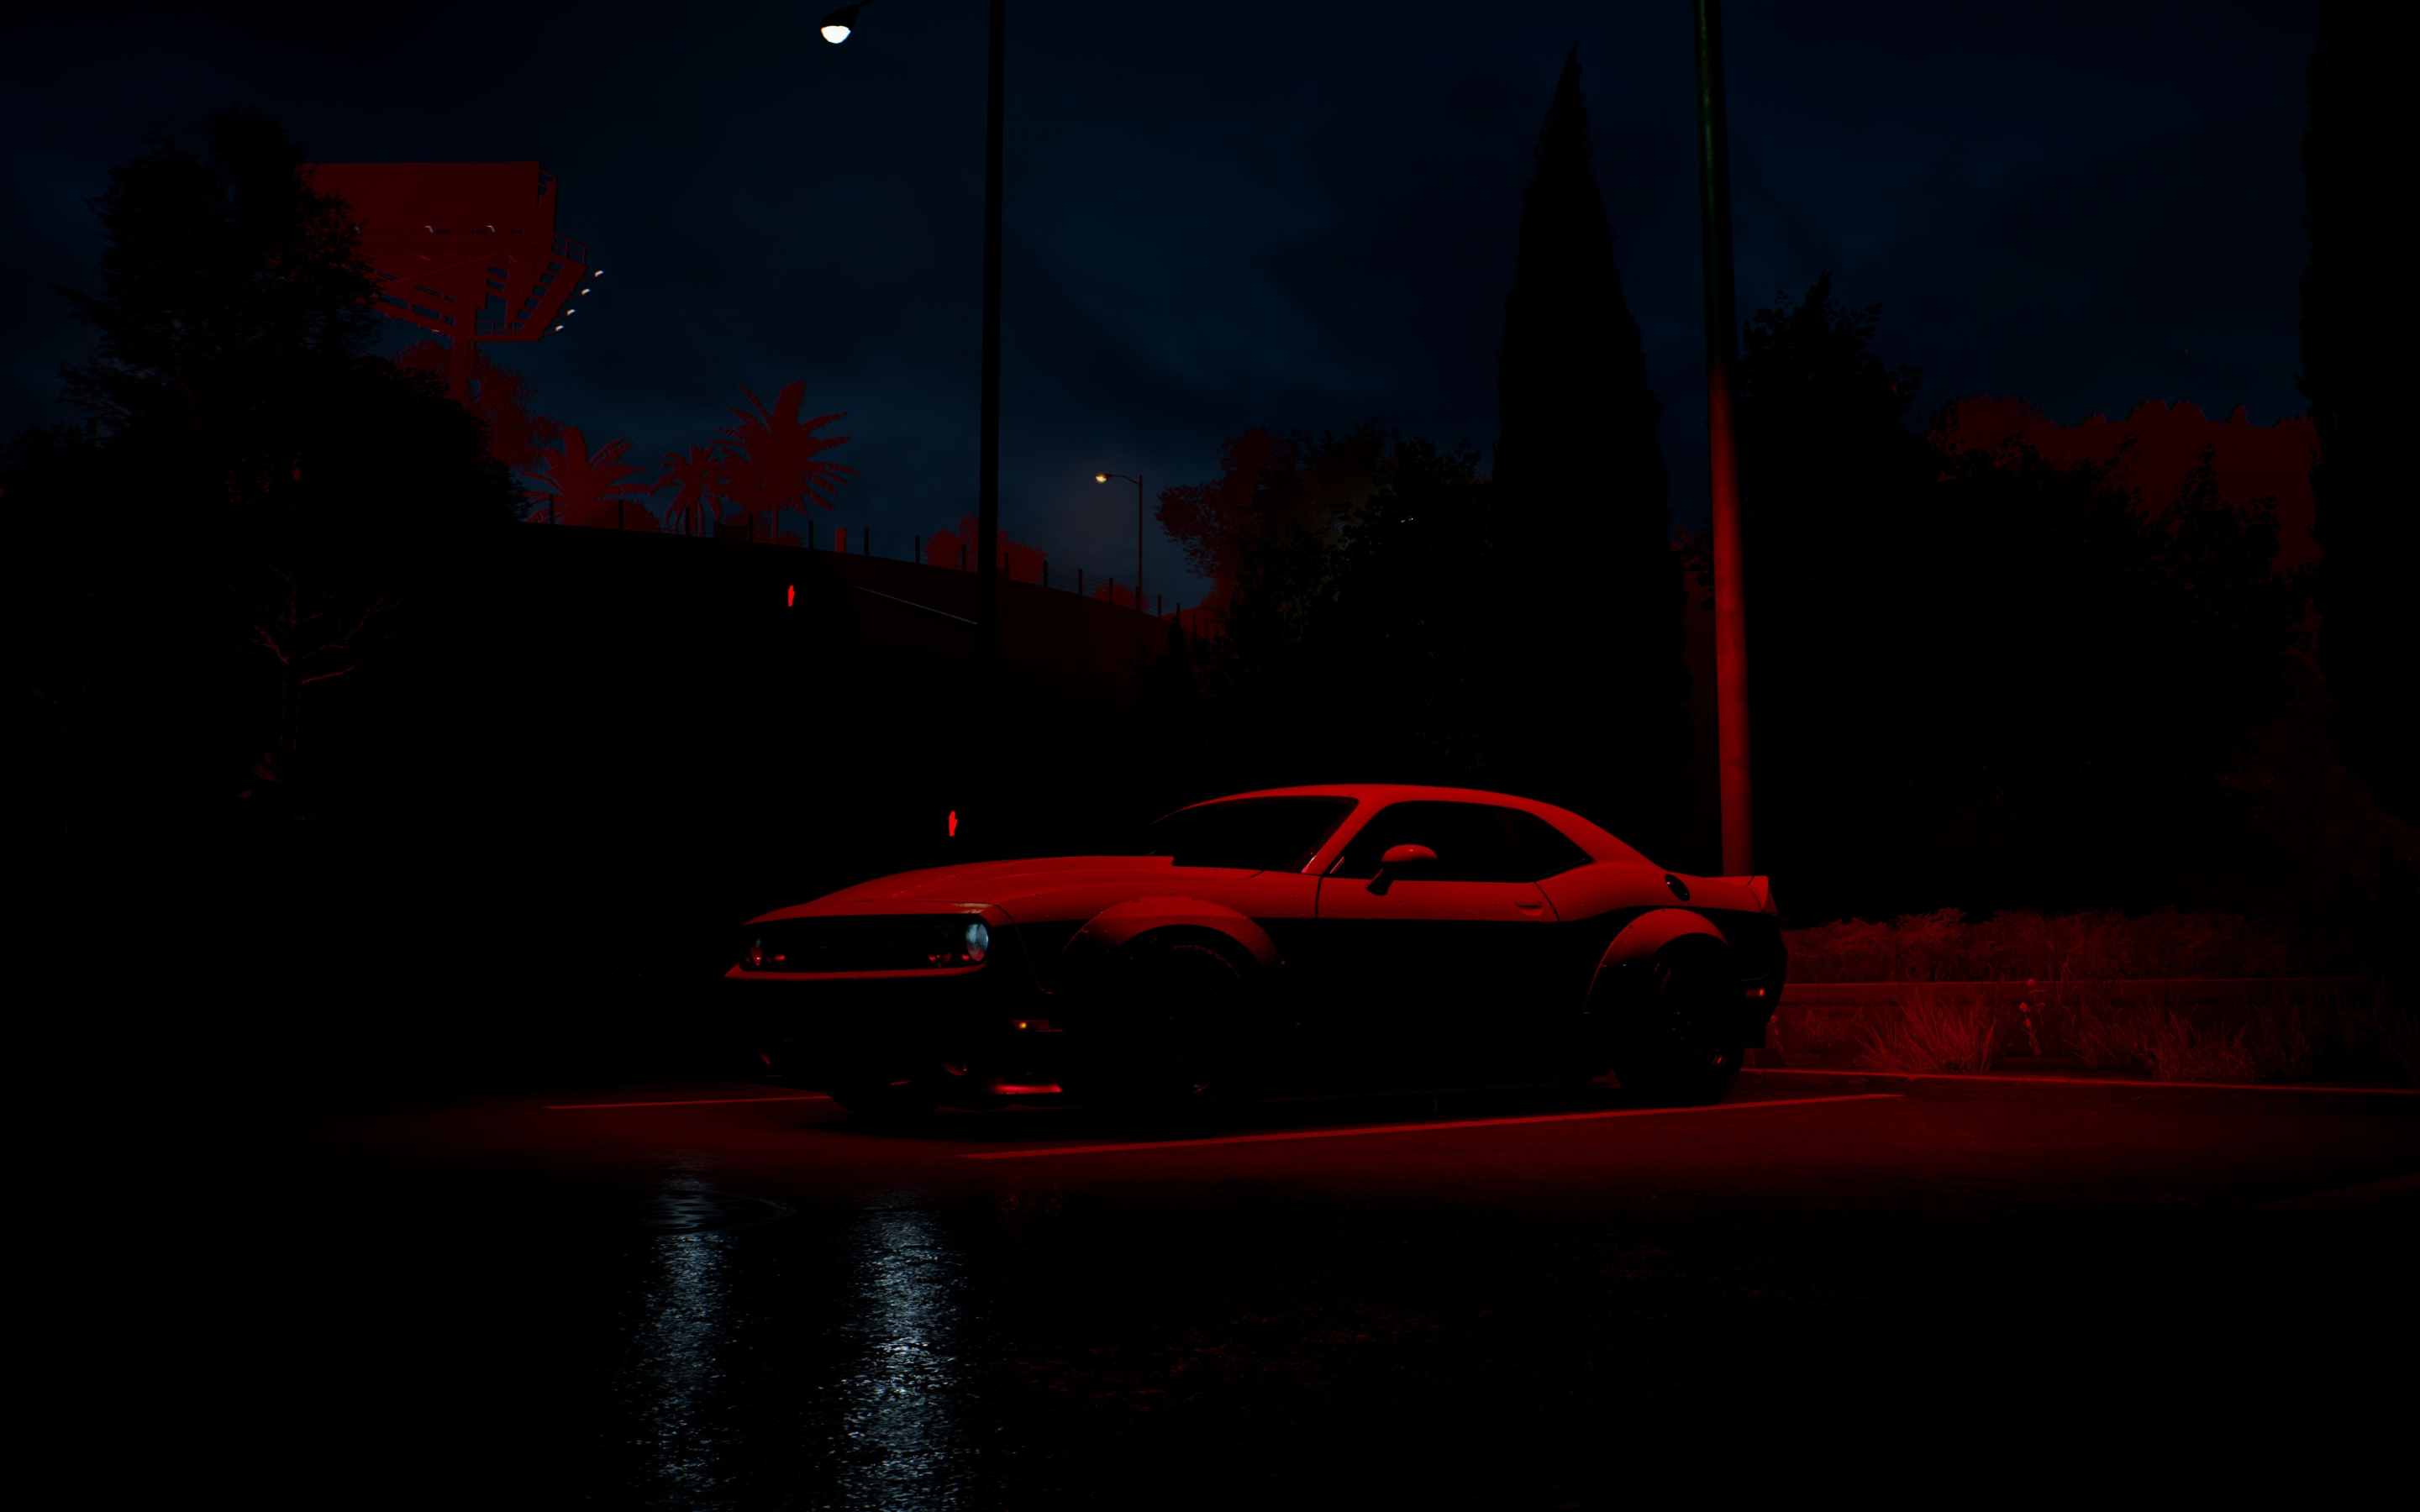 Dodge Challenger, Need for speed, red car, video game, 2880x1800 wallpaper